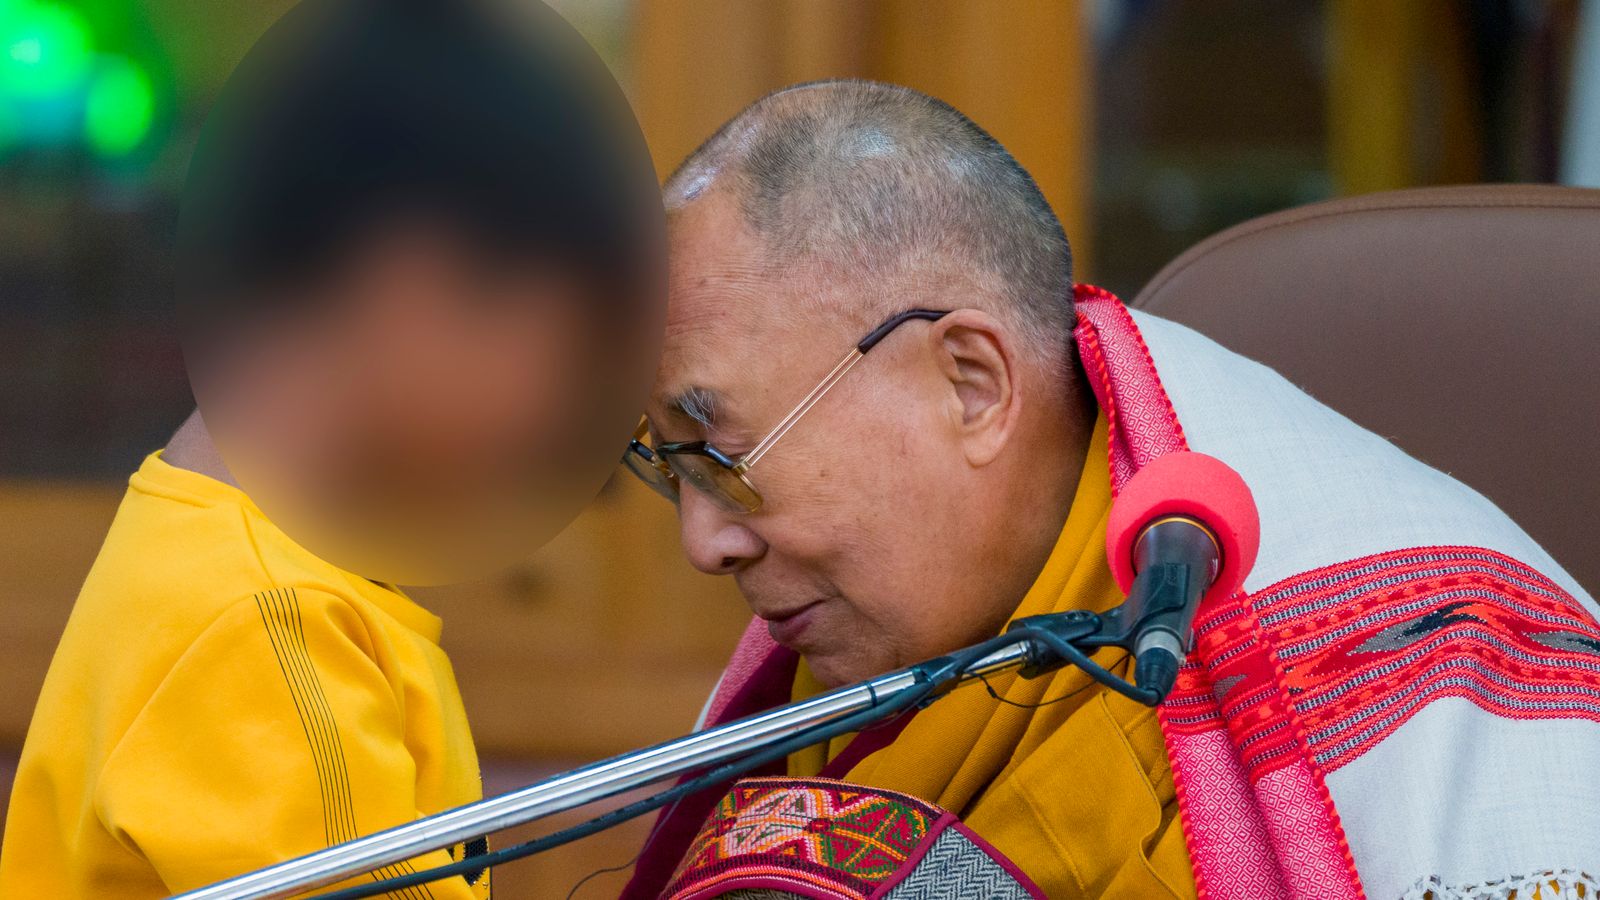 The Dalai Lama touches heads with the young boy. Pic: AP